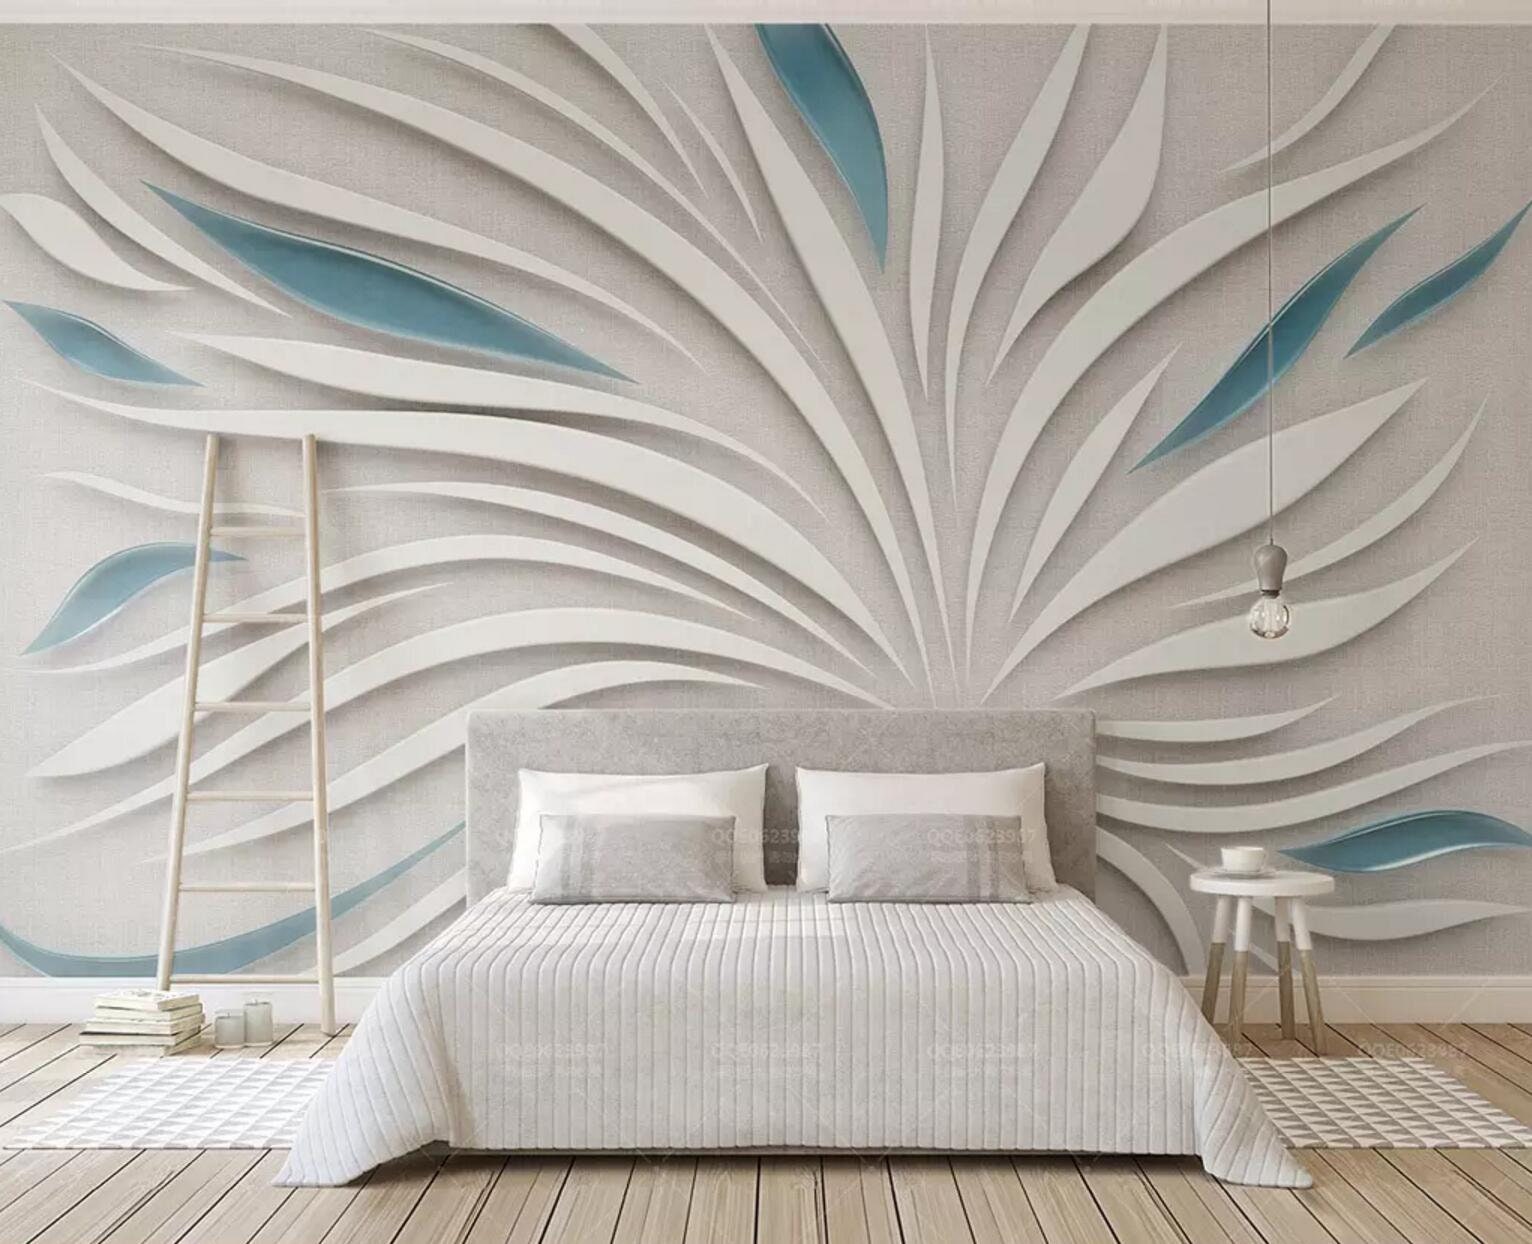 show original title Details about   3D Spring Painting H584 Wallpaper Wall art Self Adhesive Removable Sticker Wend 